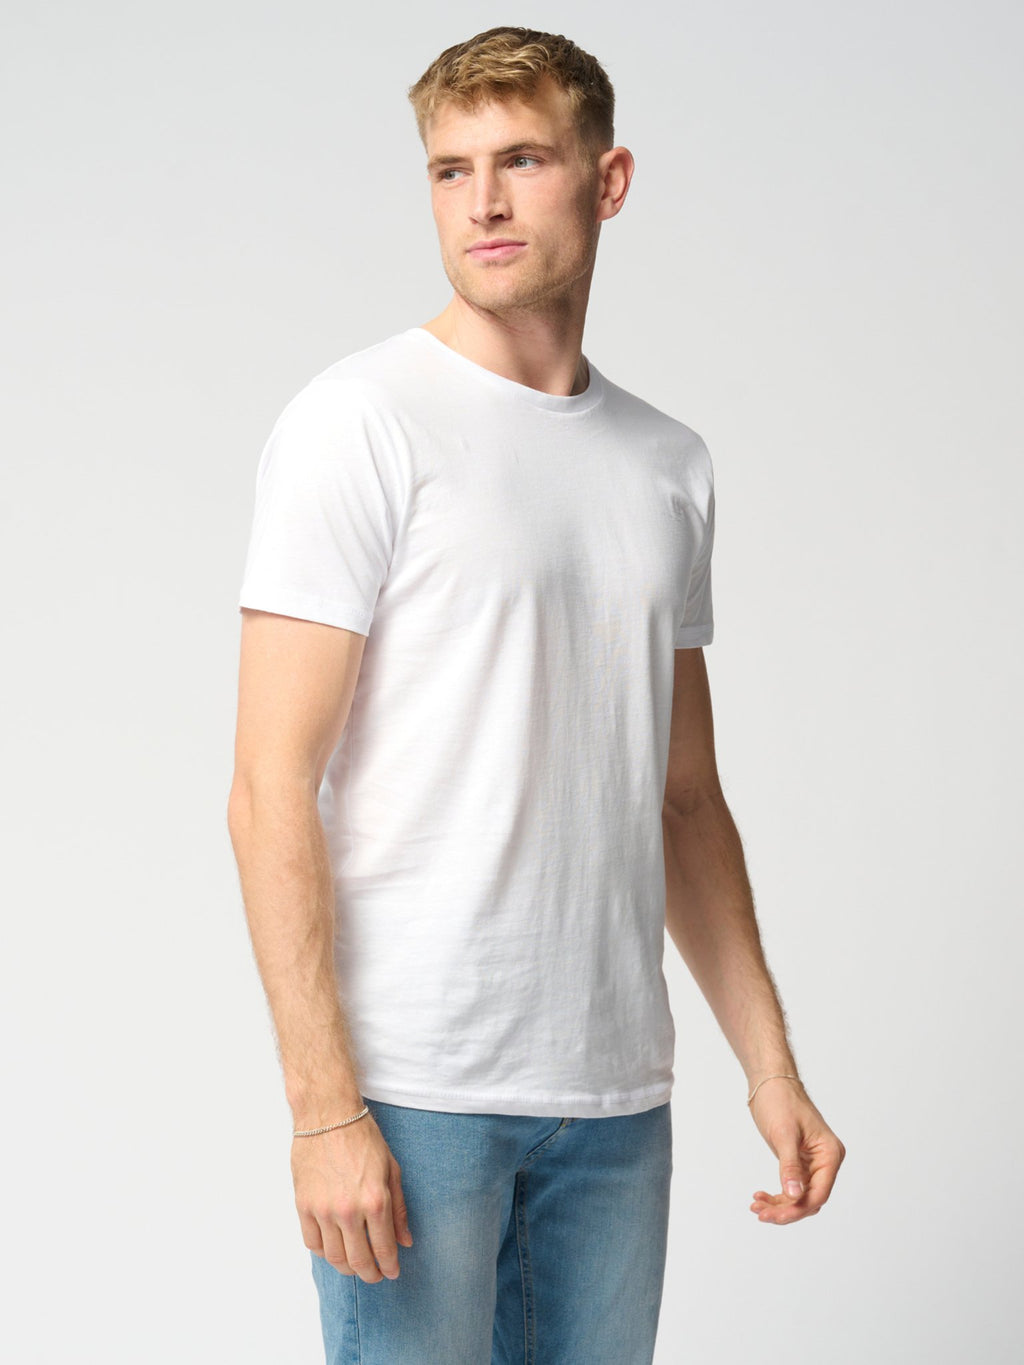 T-shirt musculaire - blanc